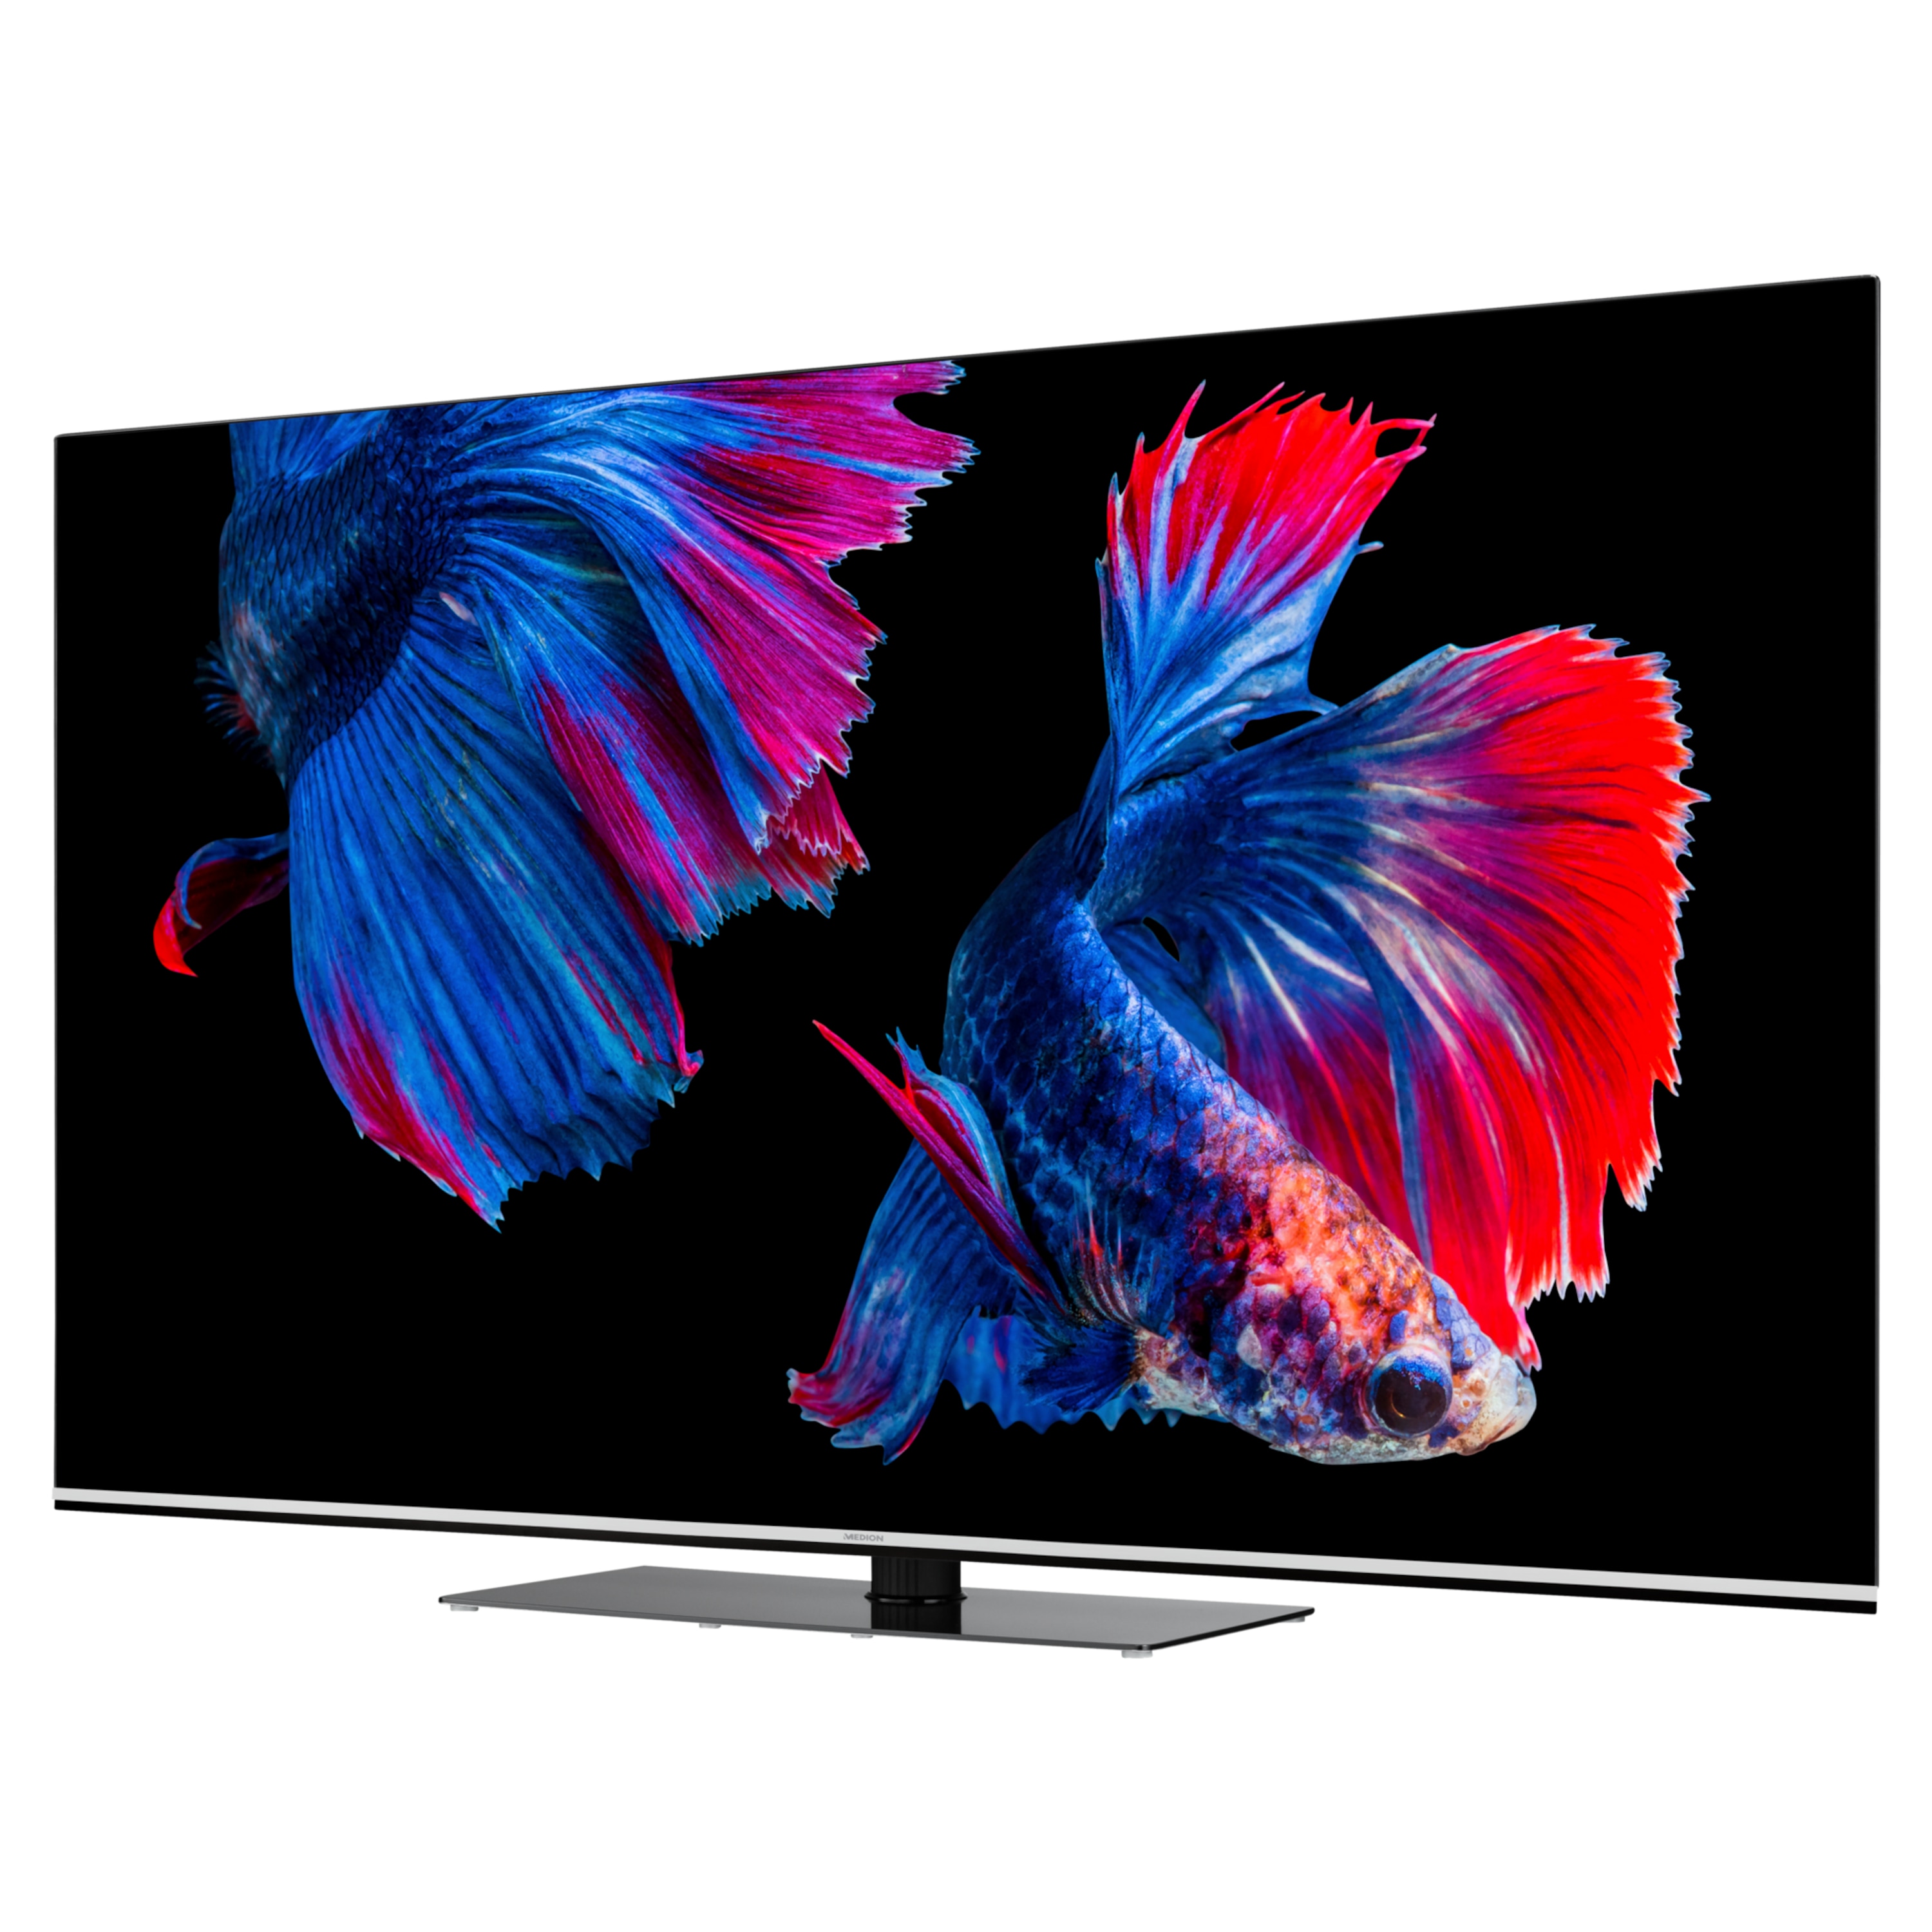 MEDION® LIFE® X16595 (MD 33989) OLED Smart 4K TV, 163,9 cm (65'') Ultra HD Display, HDR, Dolby Vision®, Dolby Atmos®, Micro Dimming, MEMC, 100 Hz, PVR ready, Netflix, Amazon Prime Video, Bluetooth®, DTS HD, HD Triple Tuner, CI+ (B-Ware)